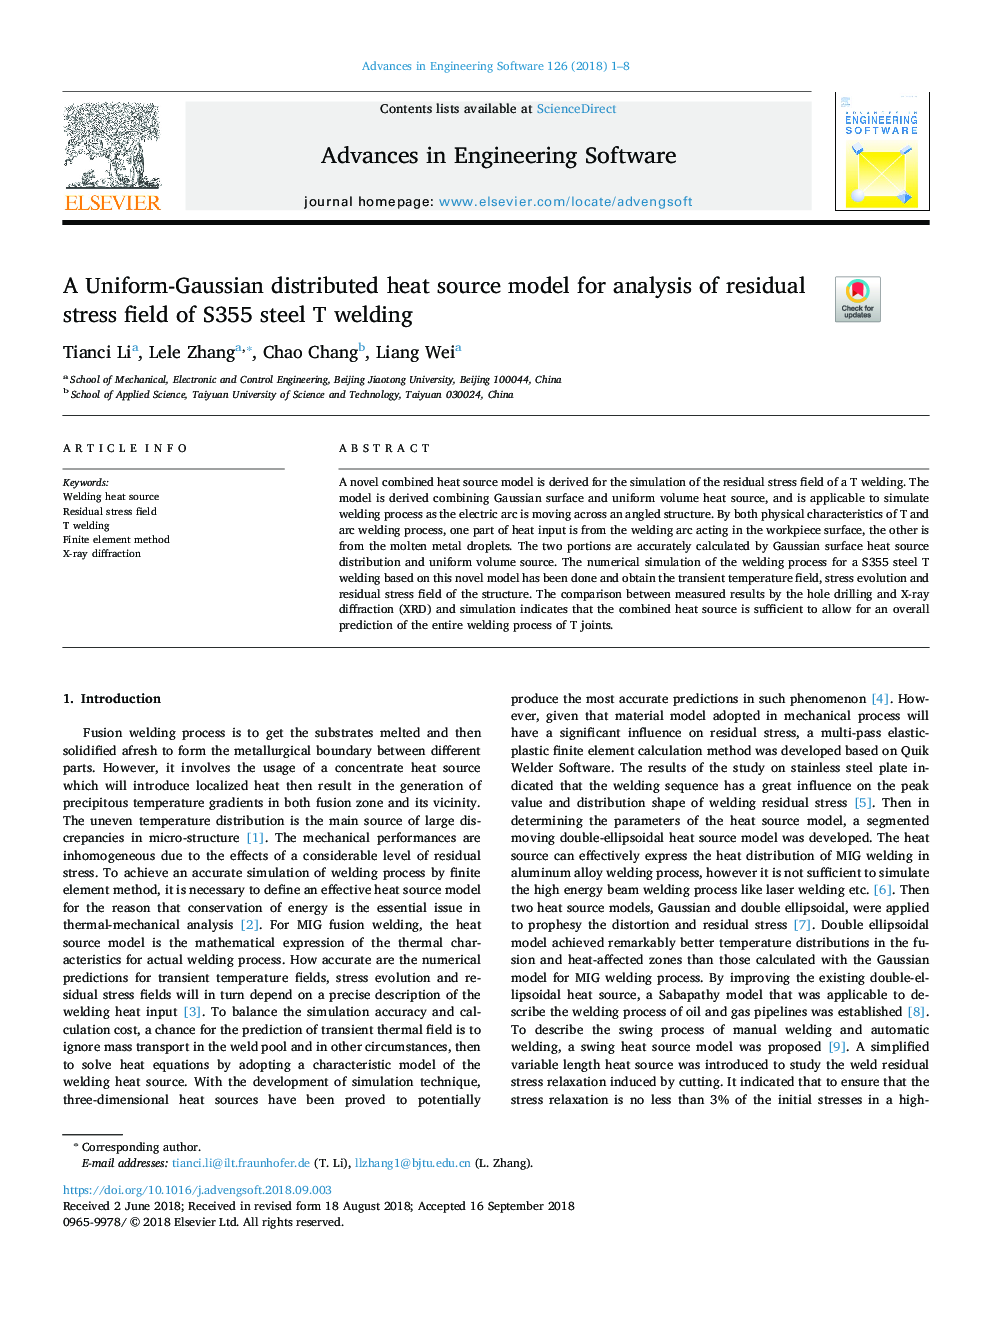 A Uniform-Gaussian distributed heat source model for analysis of residual stress field of S355 steel T welding